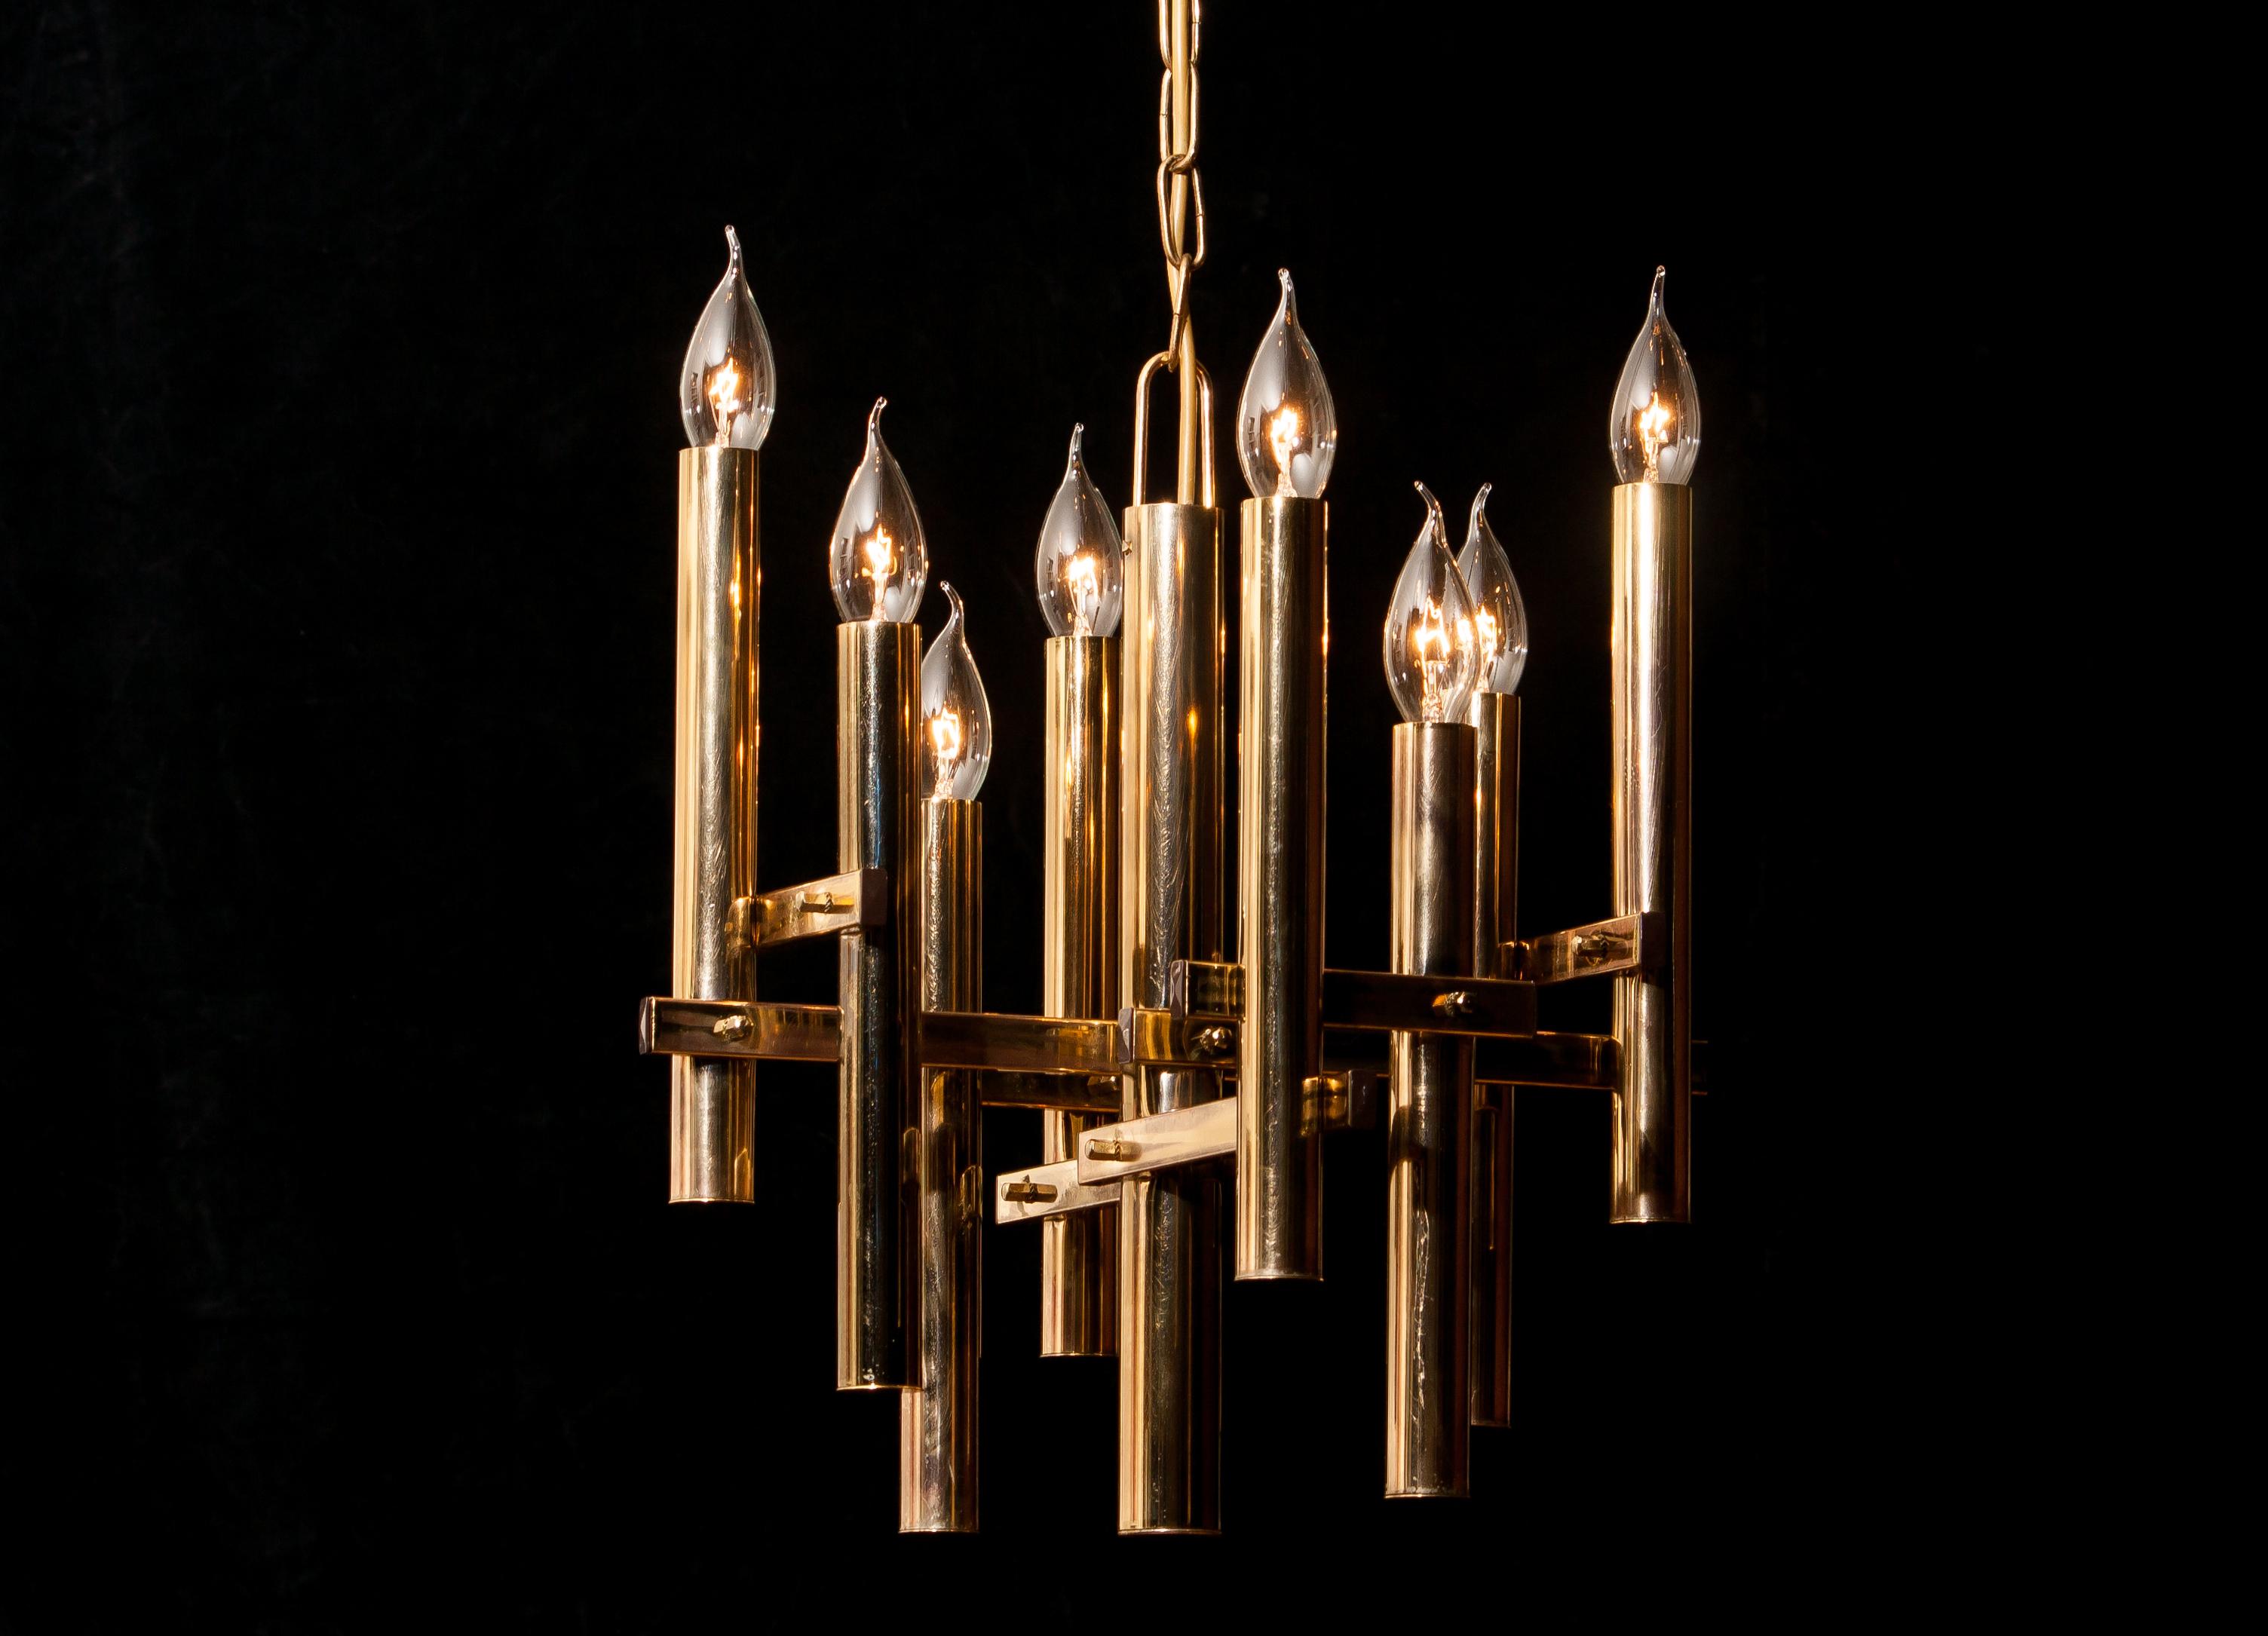 Beautiful brass pendant by Gaetano Sciolari, Italy.
This wonderful lamp has eight fittings.
The height is adjustable.
It is in excellent condition.
Period 1960s.
Dimensions: H 93 cm, ø 40 cm.